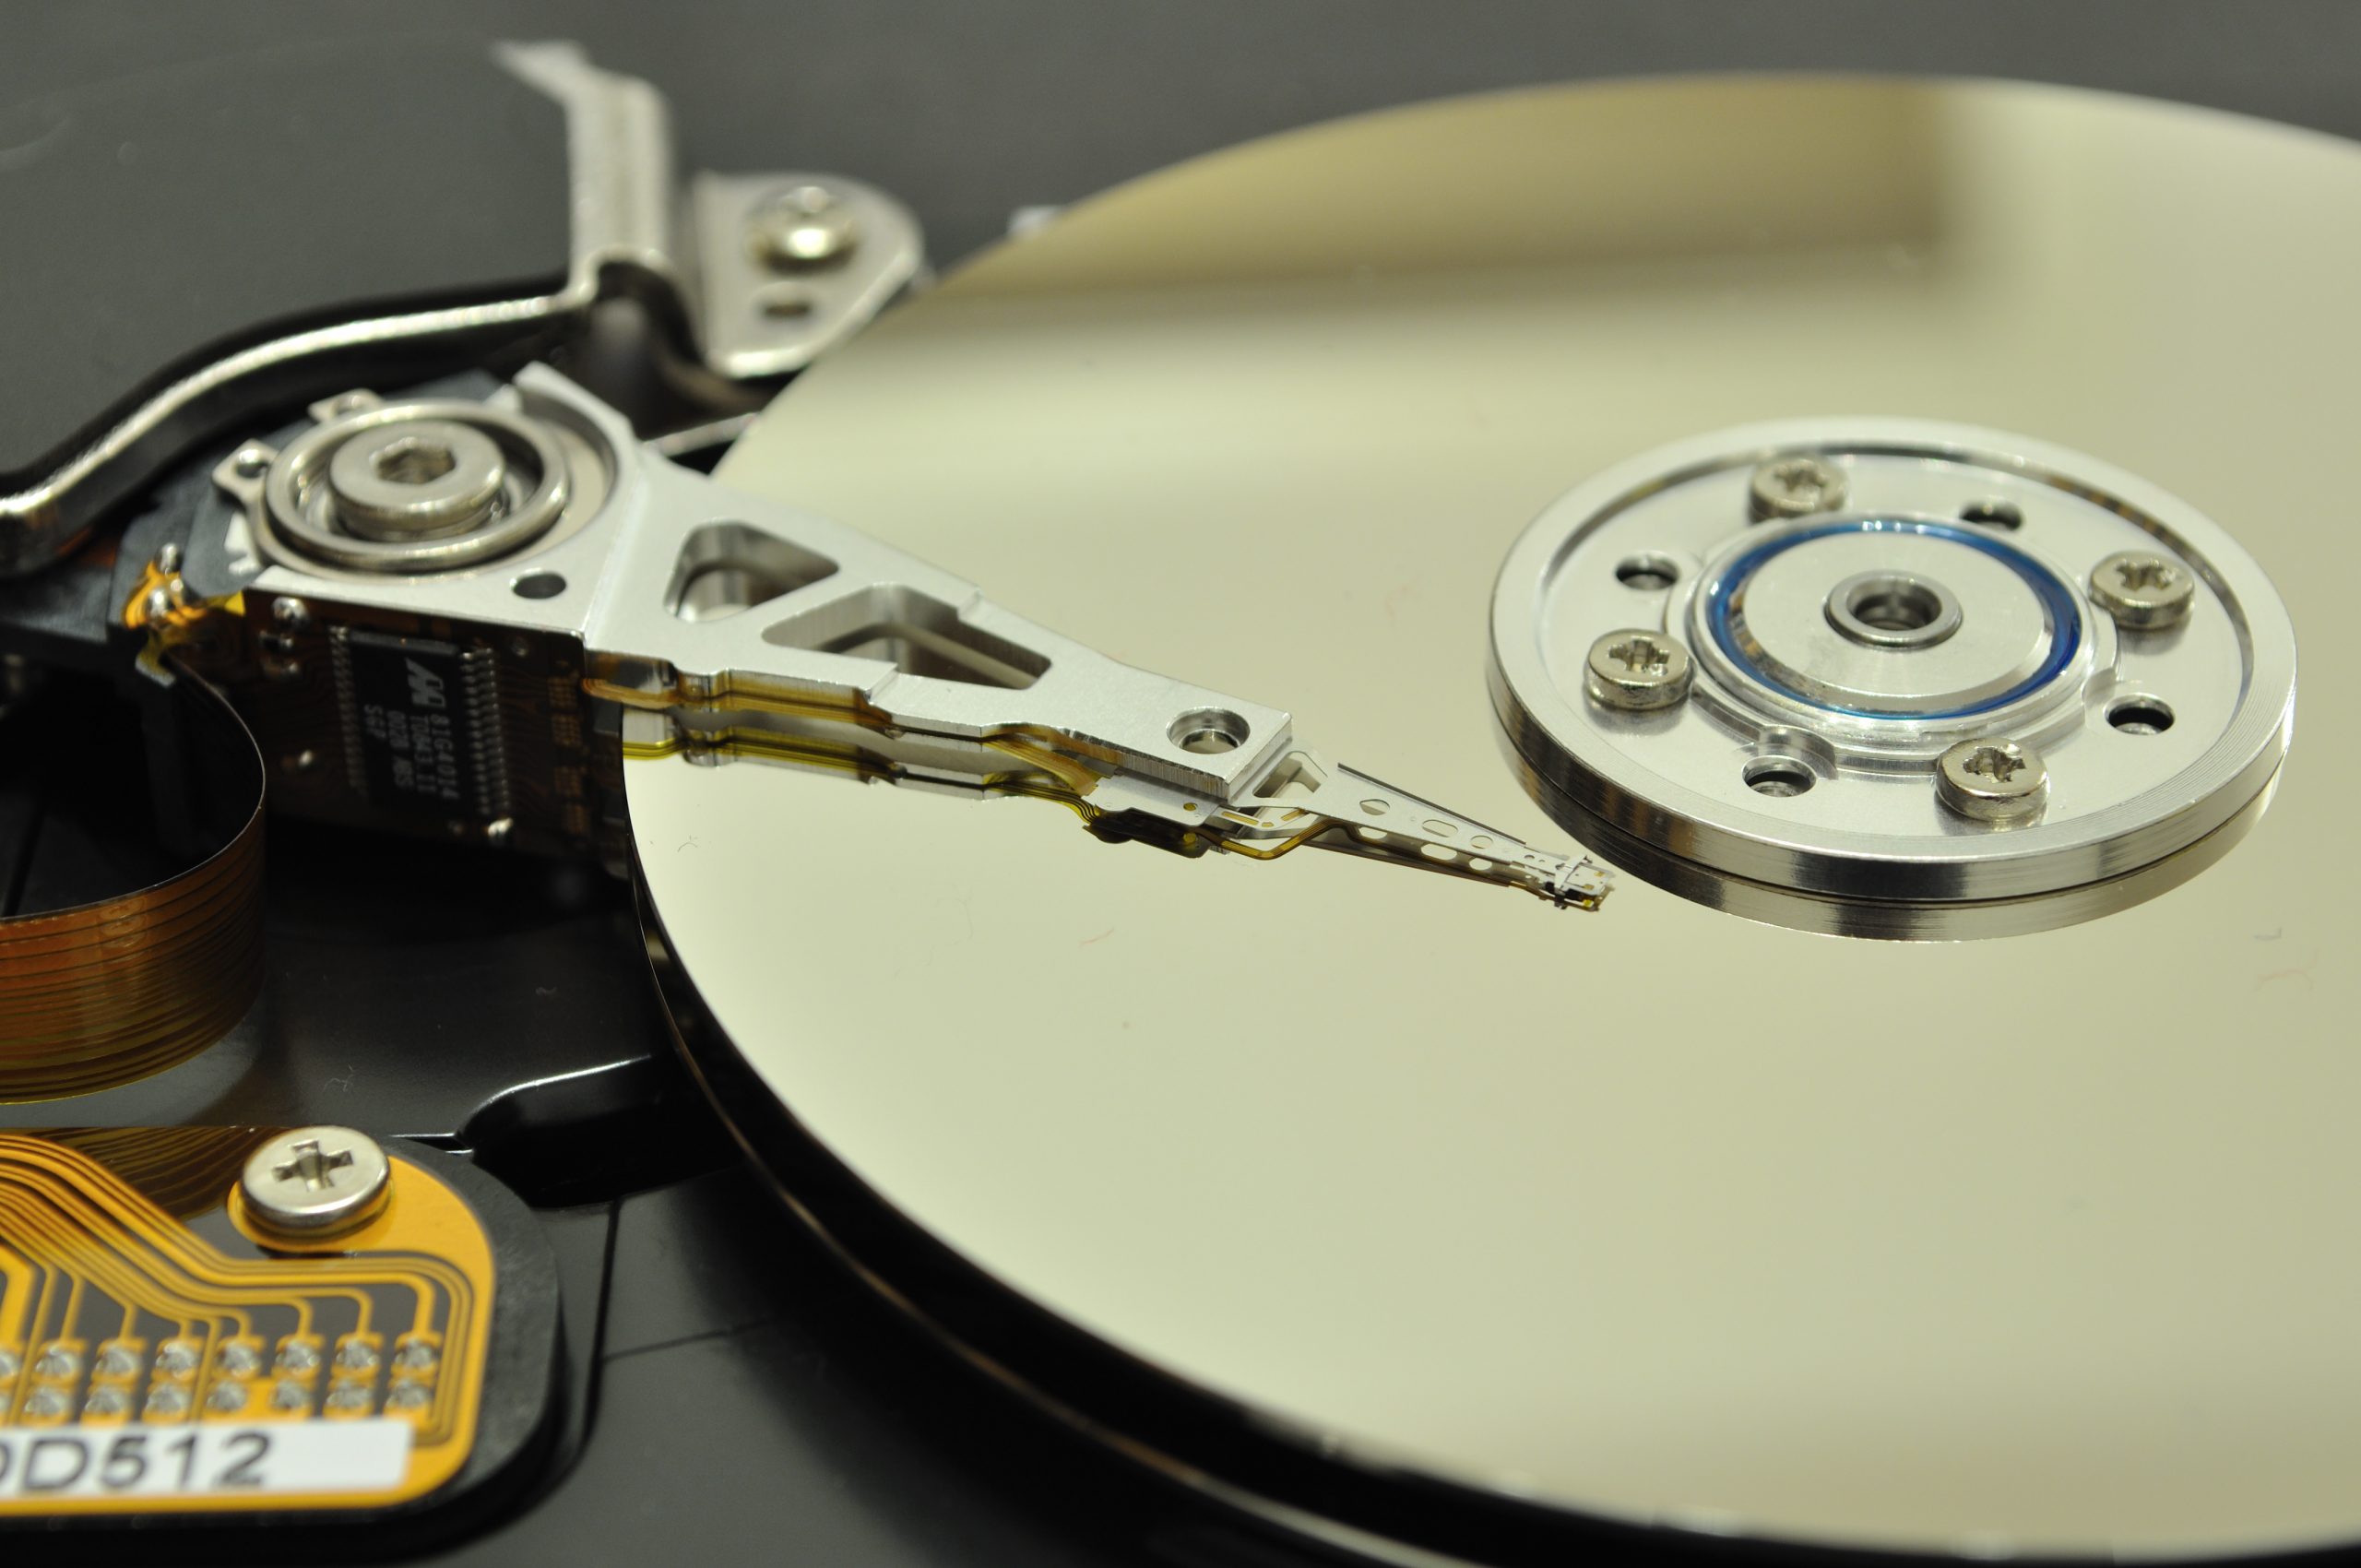 Open Hard Disk Drive for Recovery TheTechMentor.com